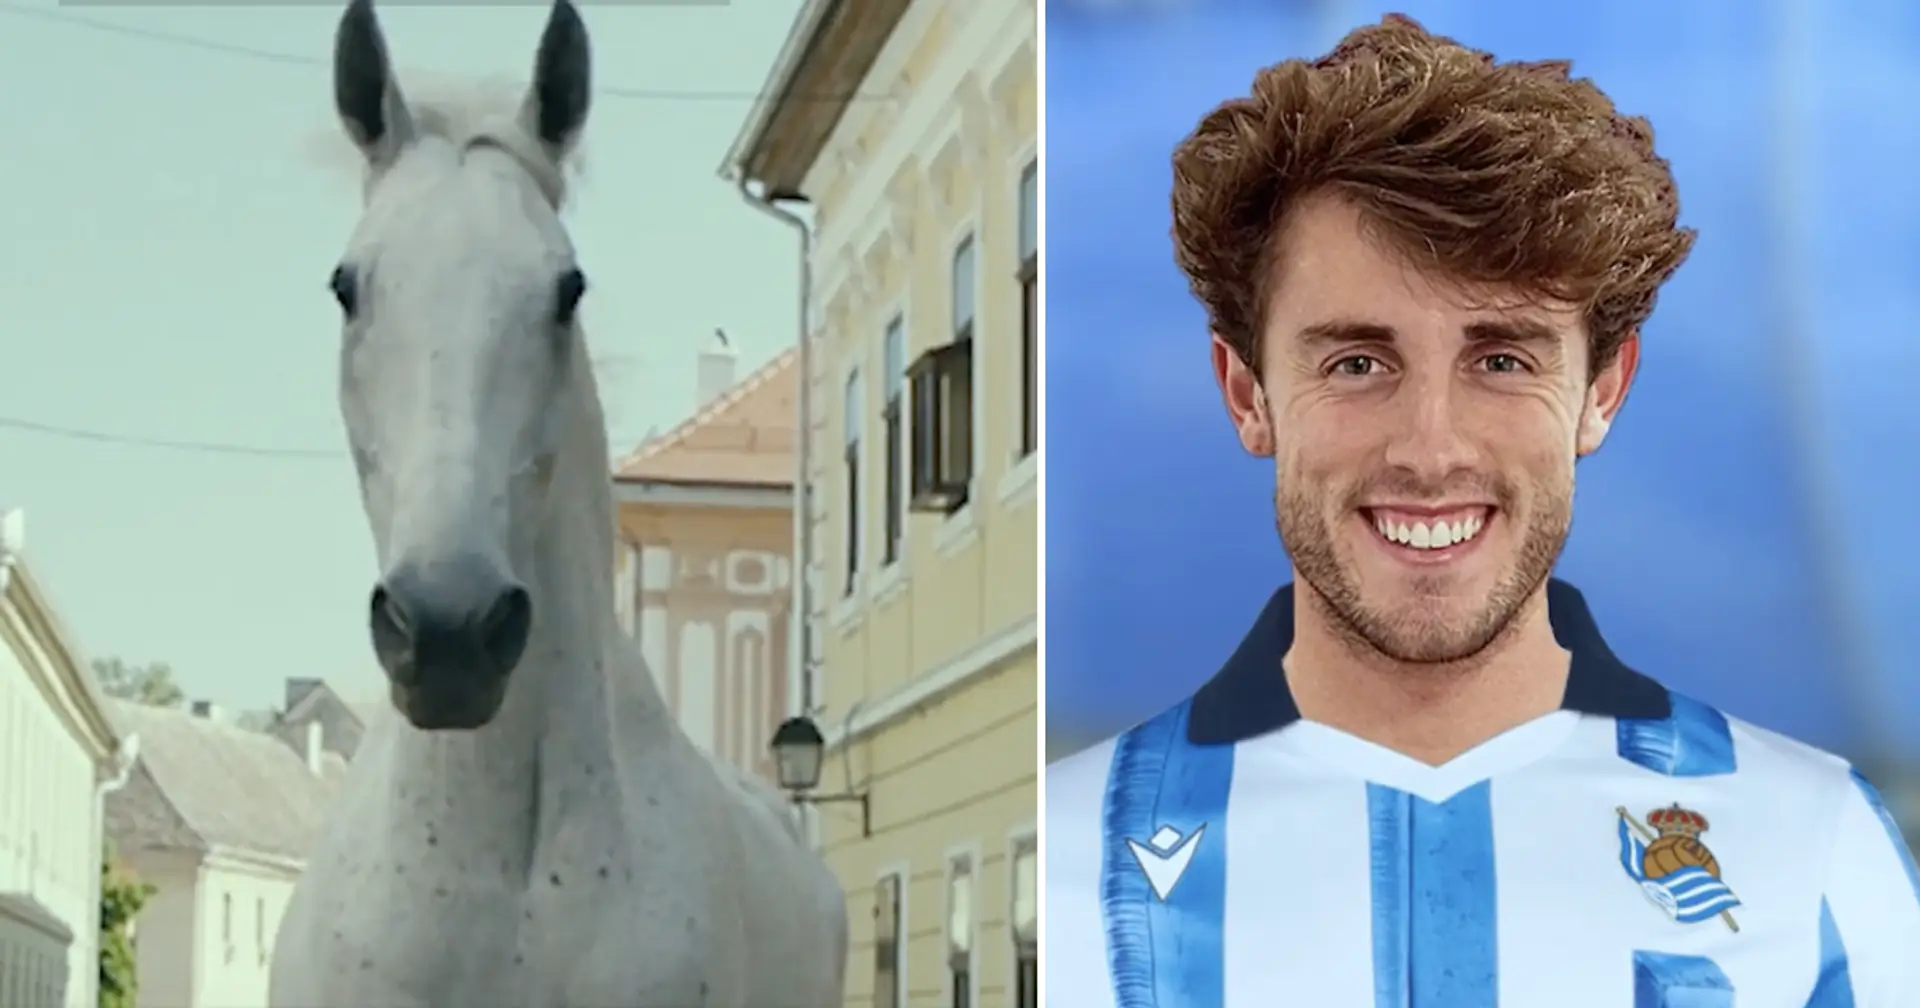 Real Sociedad announce Odriozola signing with bizarre horse video